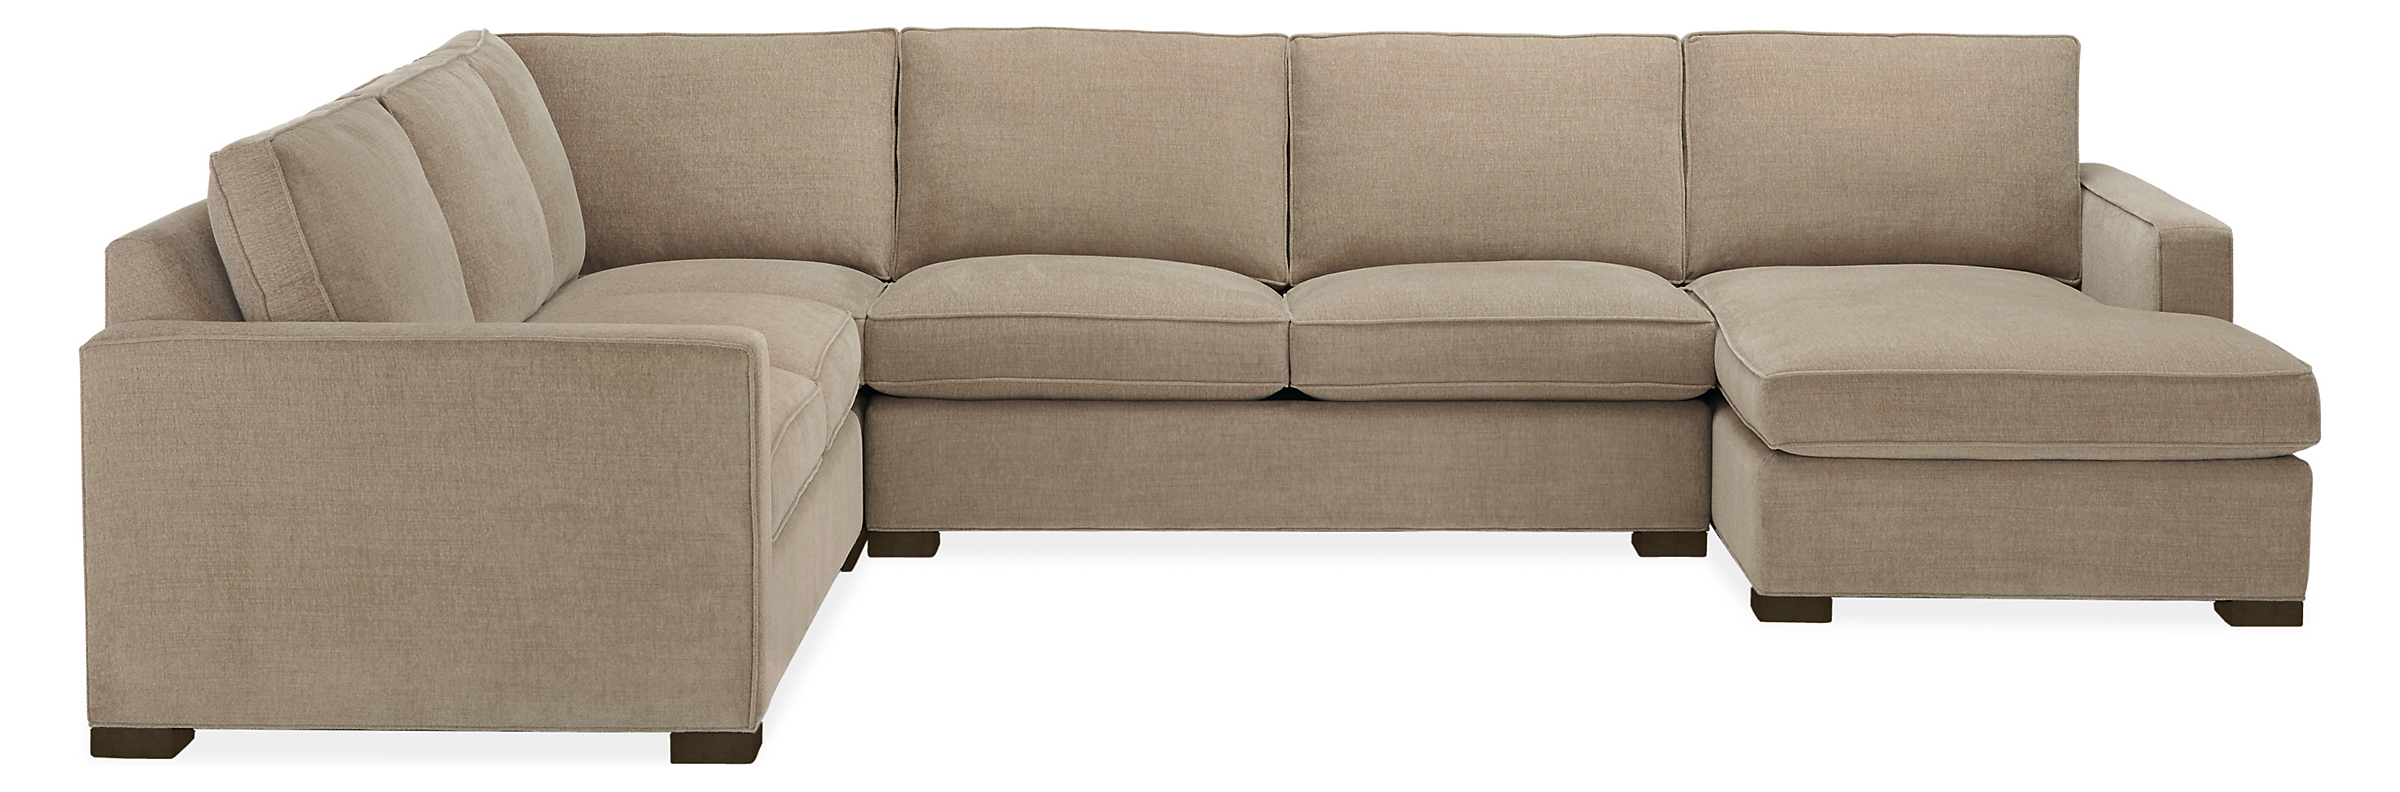 Morrison 144x112" Four-Piece Sectional with Right-Arm Chaise